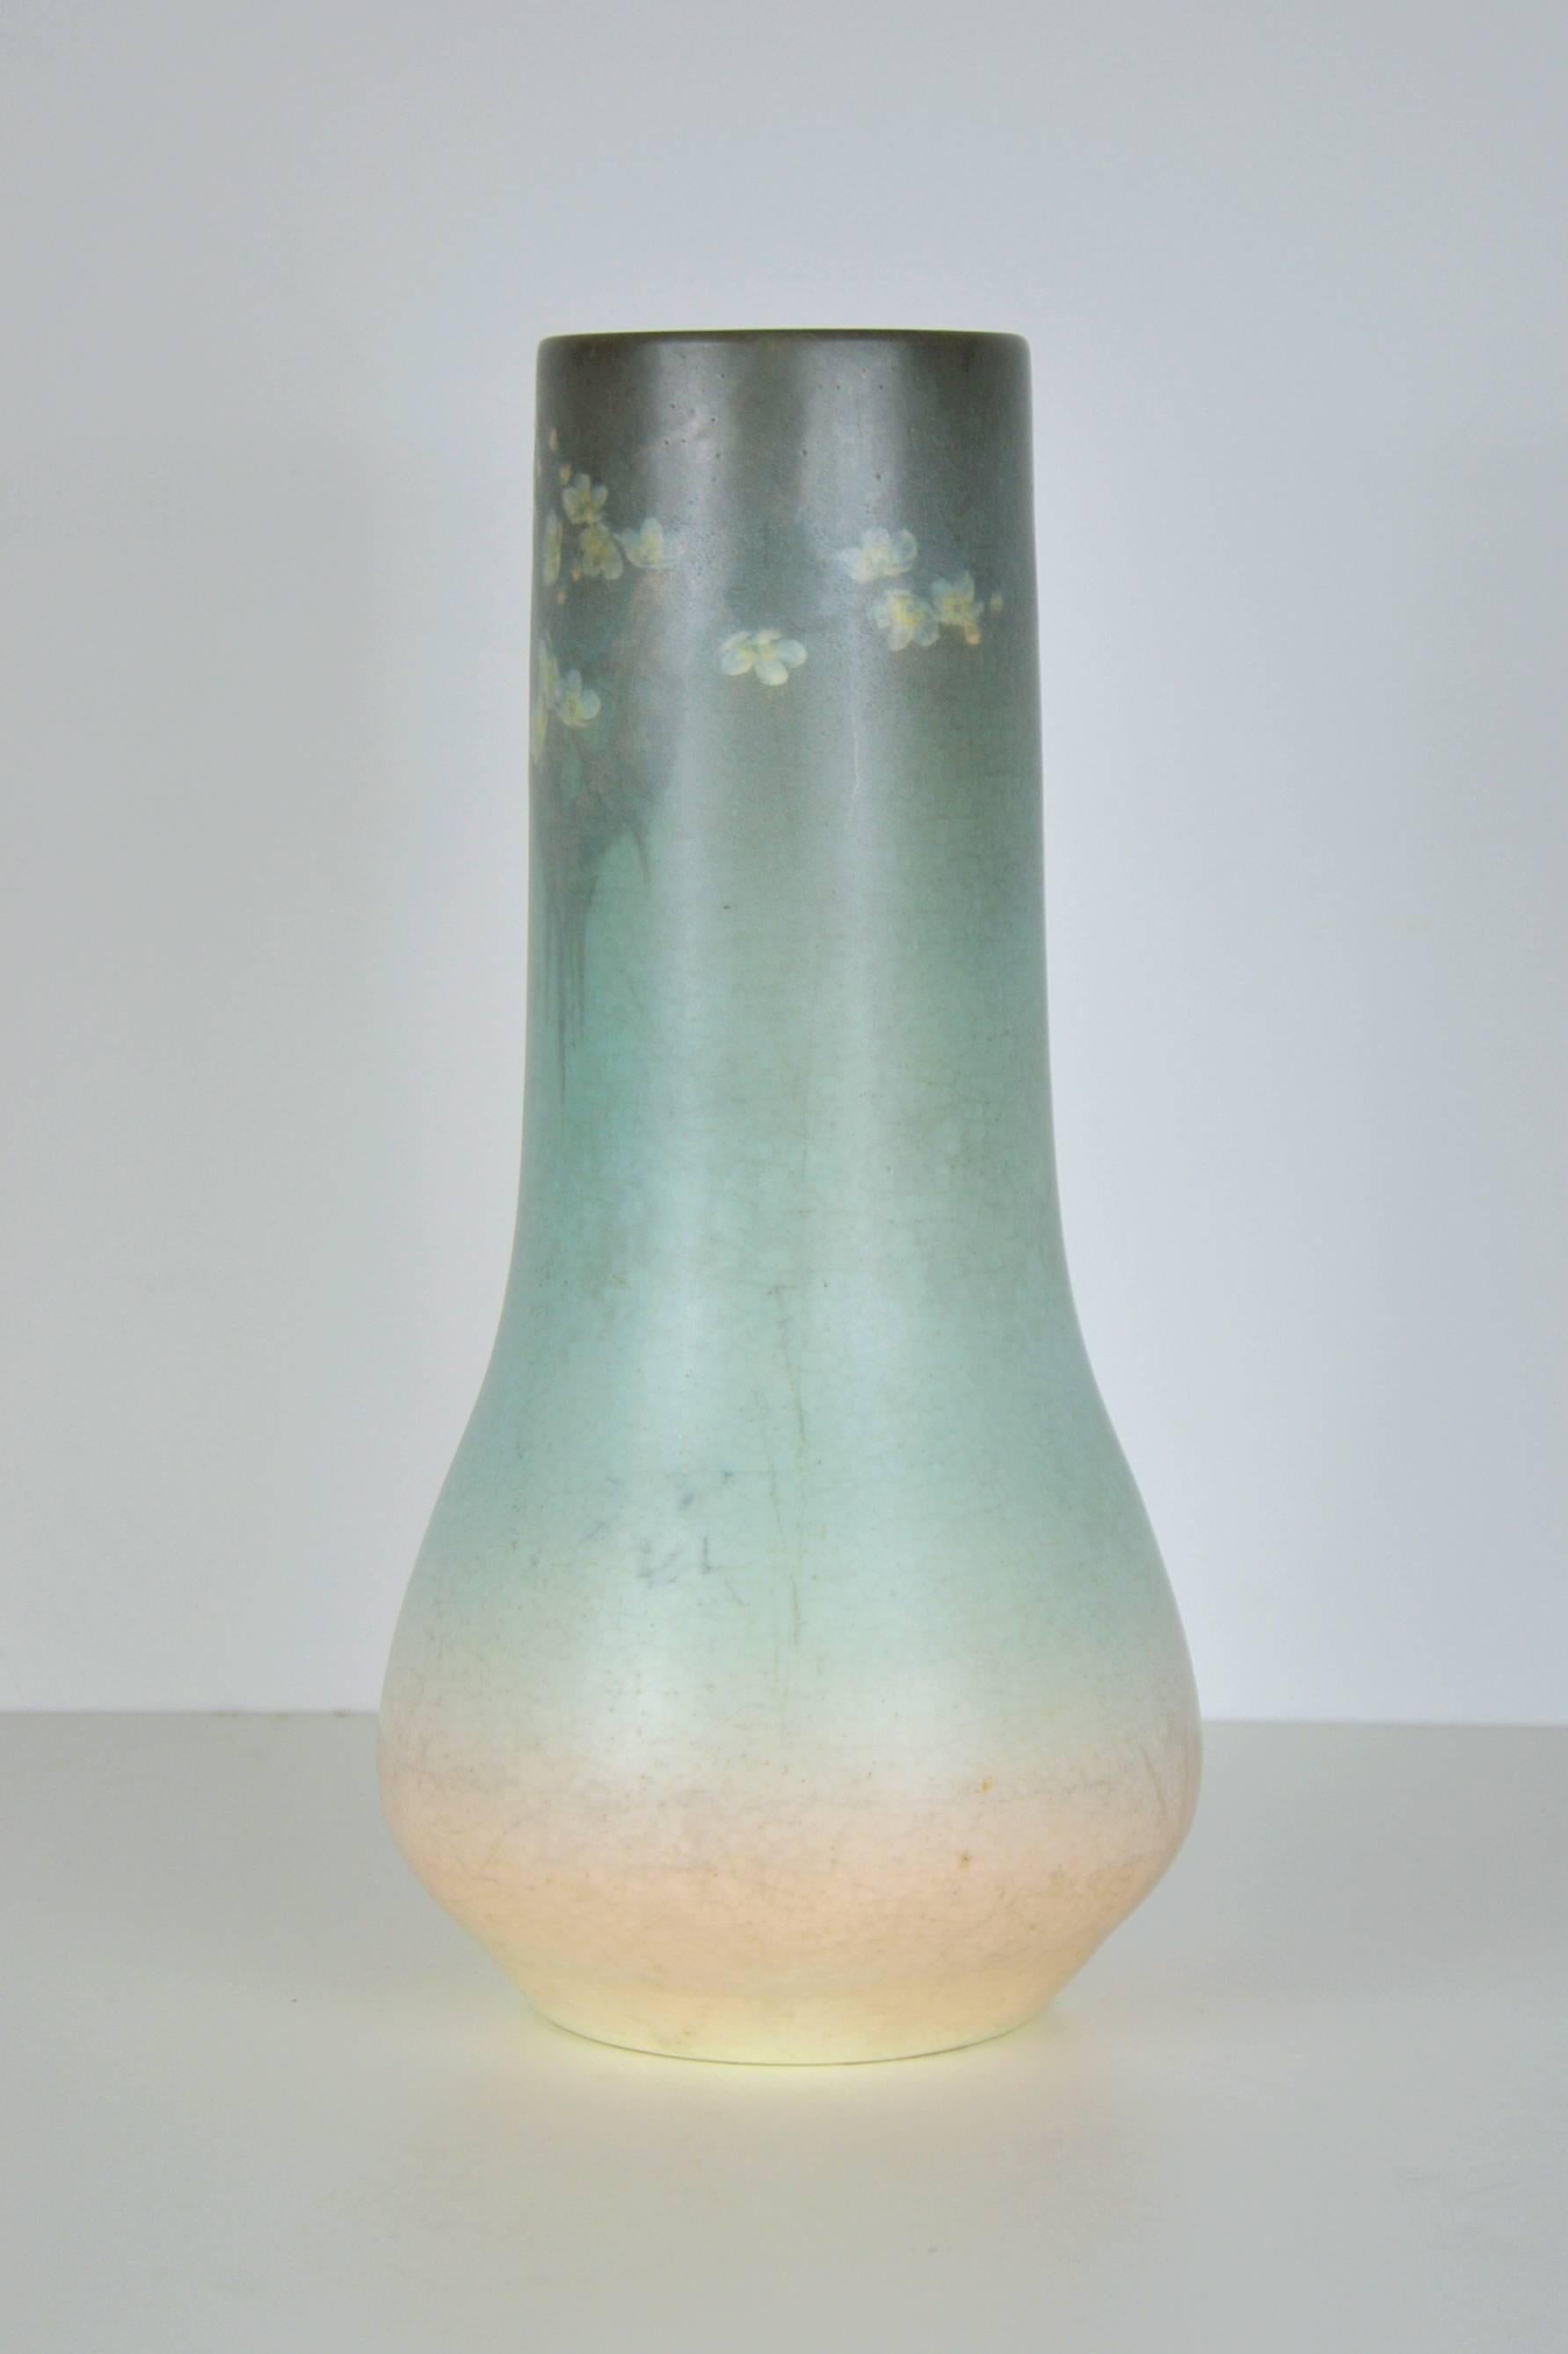 A beautiful example of a circa 1910 Rookwood pottery vase decorated by the renown artist Edward Timothy Hurley (Ohio, 1869-1950). The gourd shaped vase is finely hand-painted with flowering branches and features colors from pale pink, pastel blue to